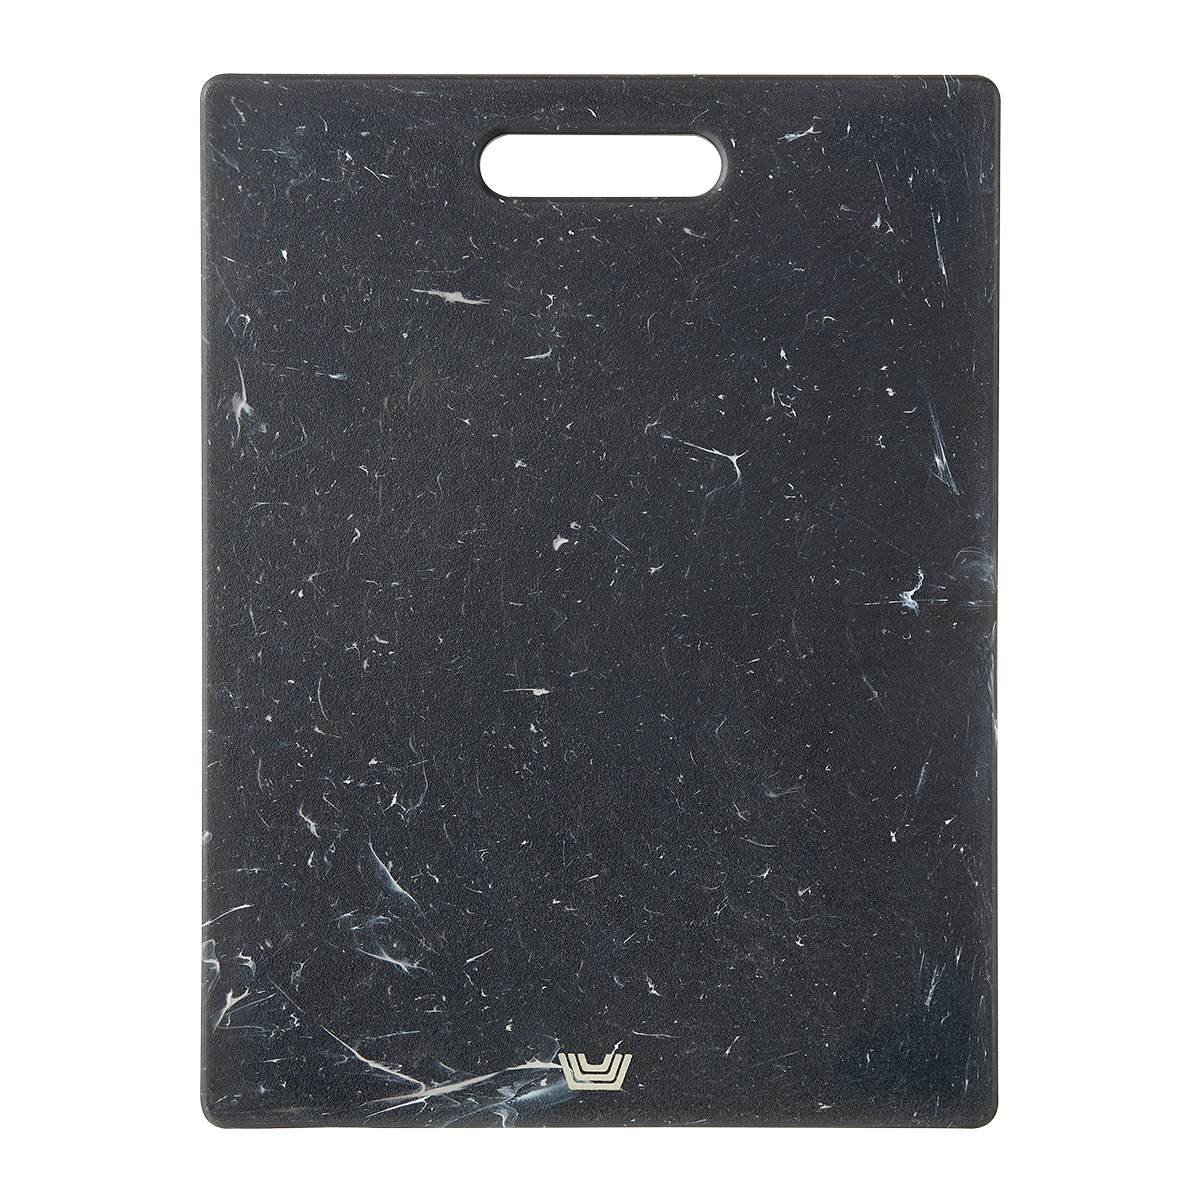 https://www.containerstore.com/catalogimages/480142/10092342-tcs-cutting-board-black-mar.jpg